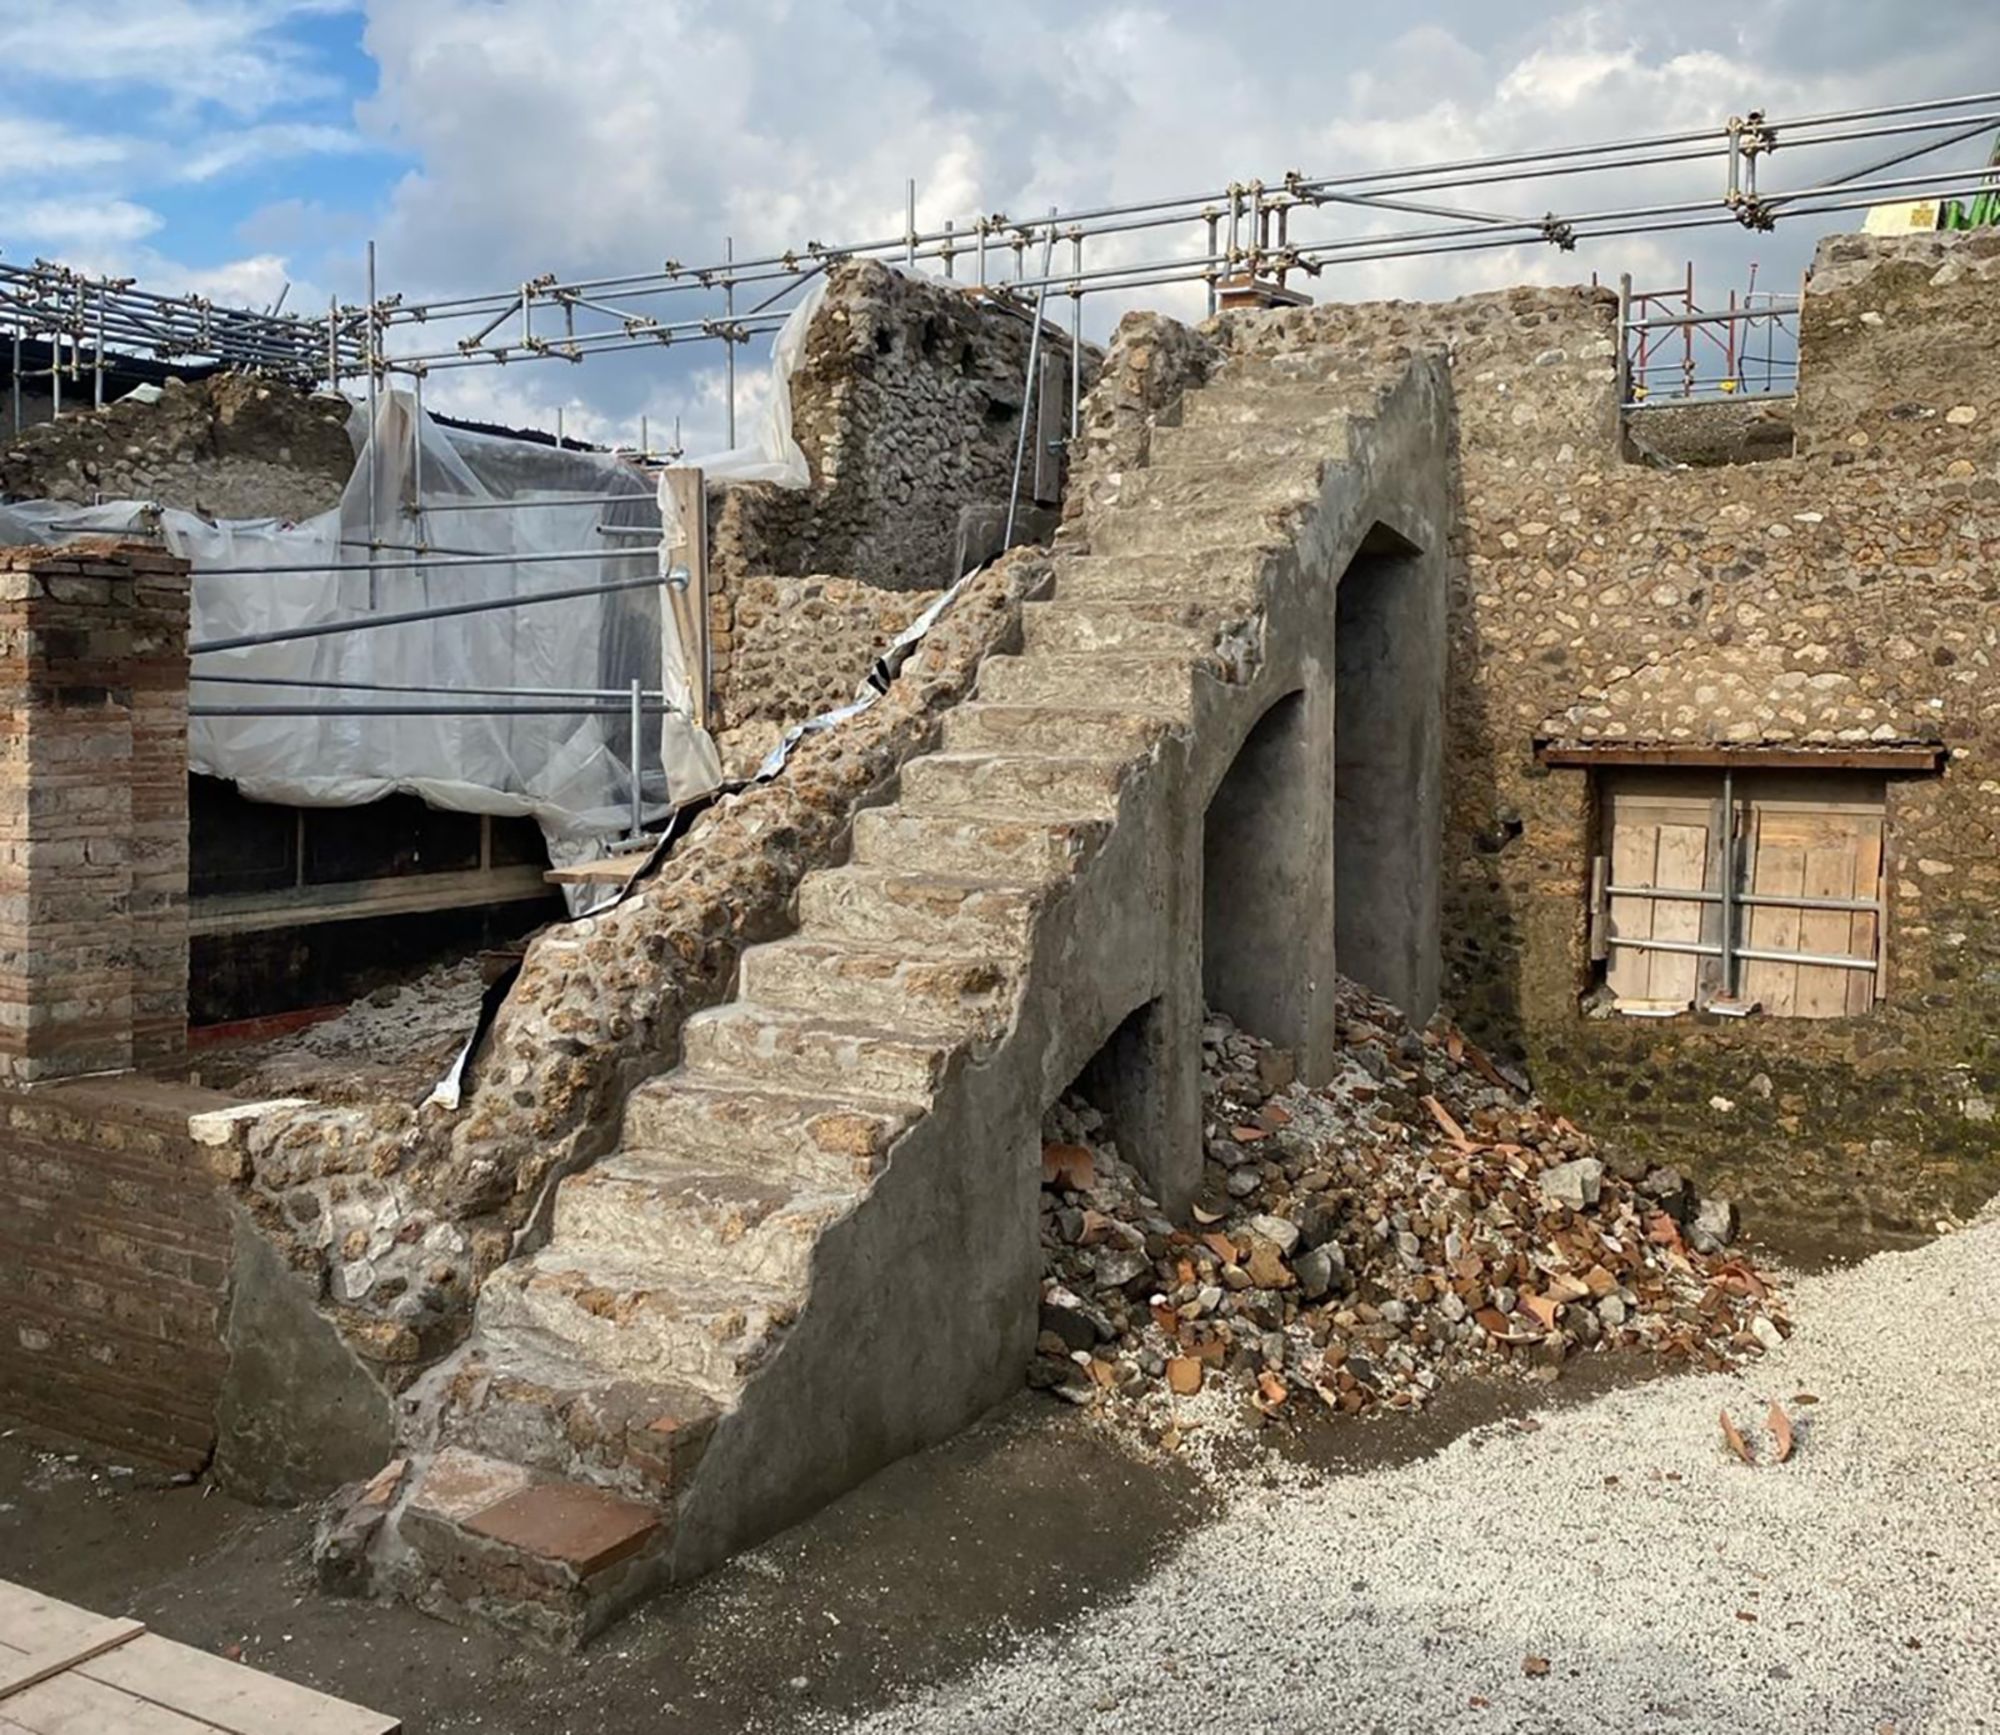 The ancient building site at Pompeii.